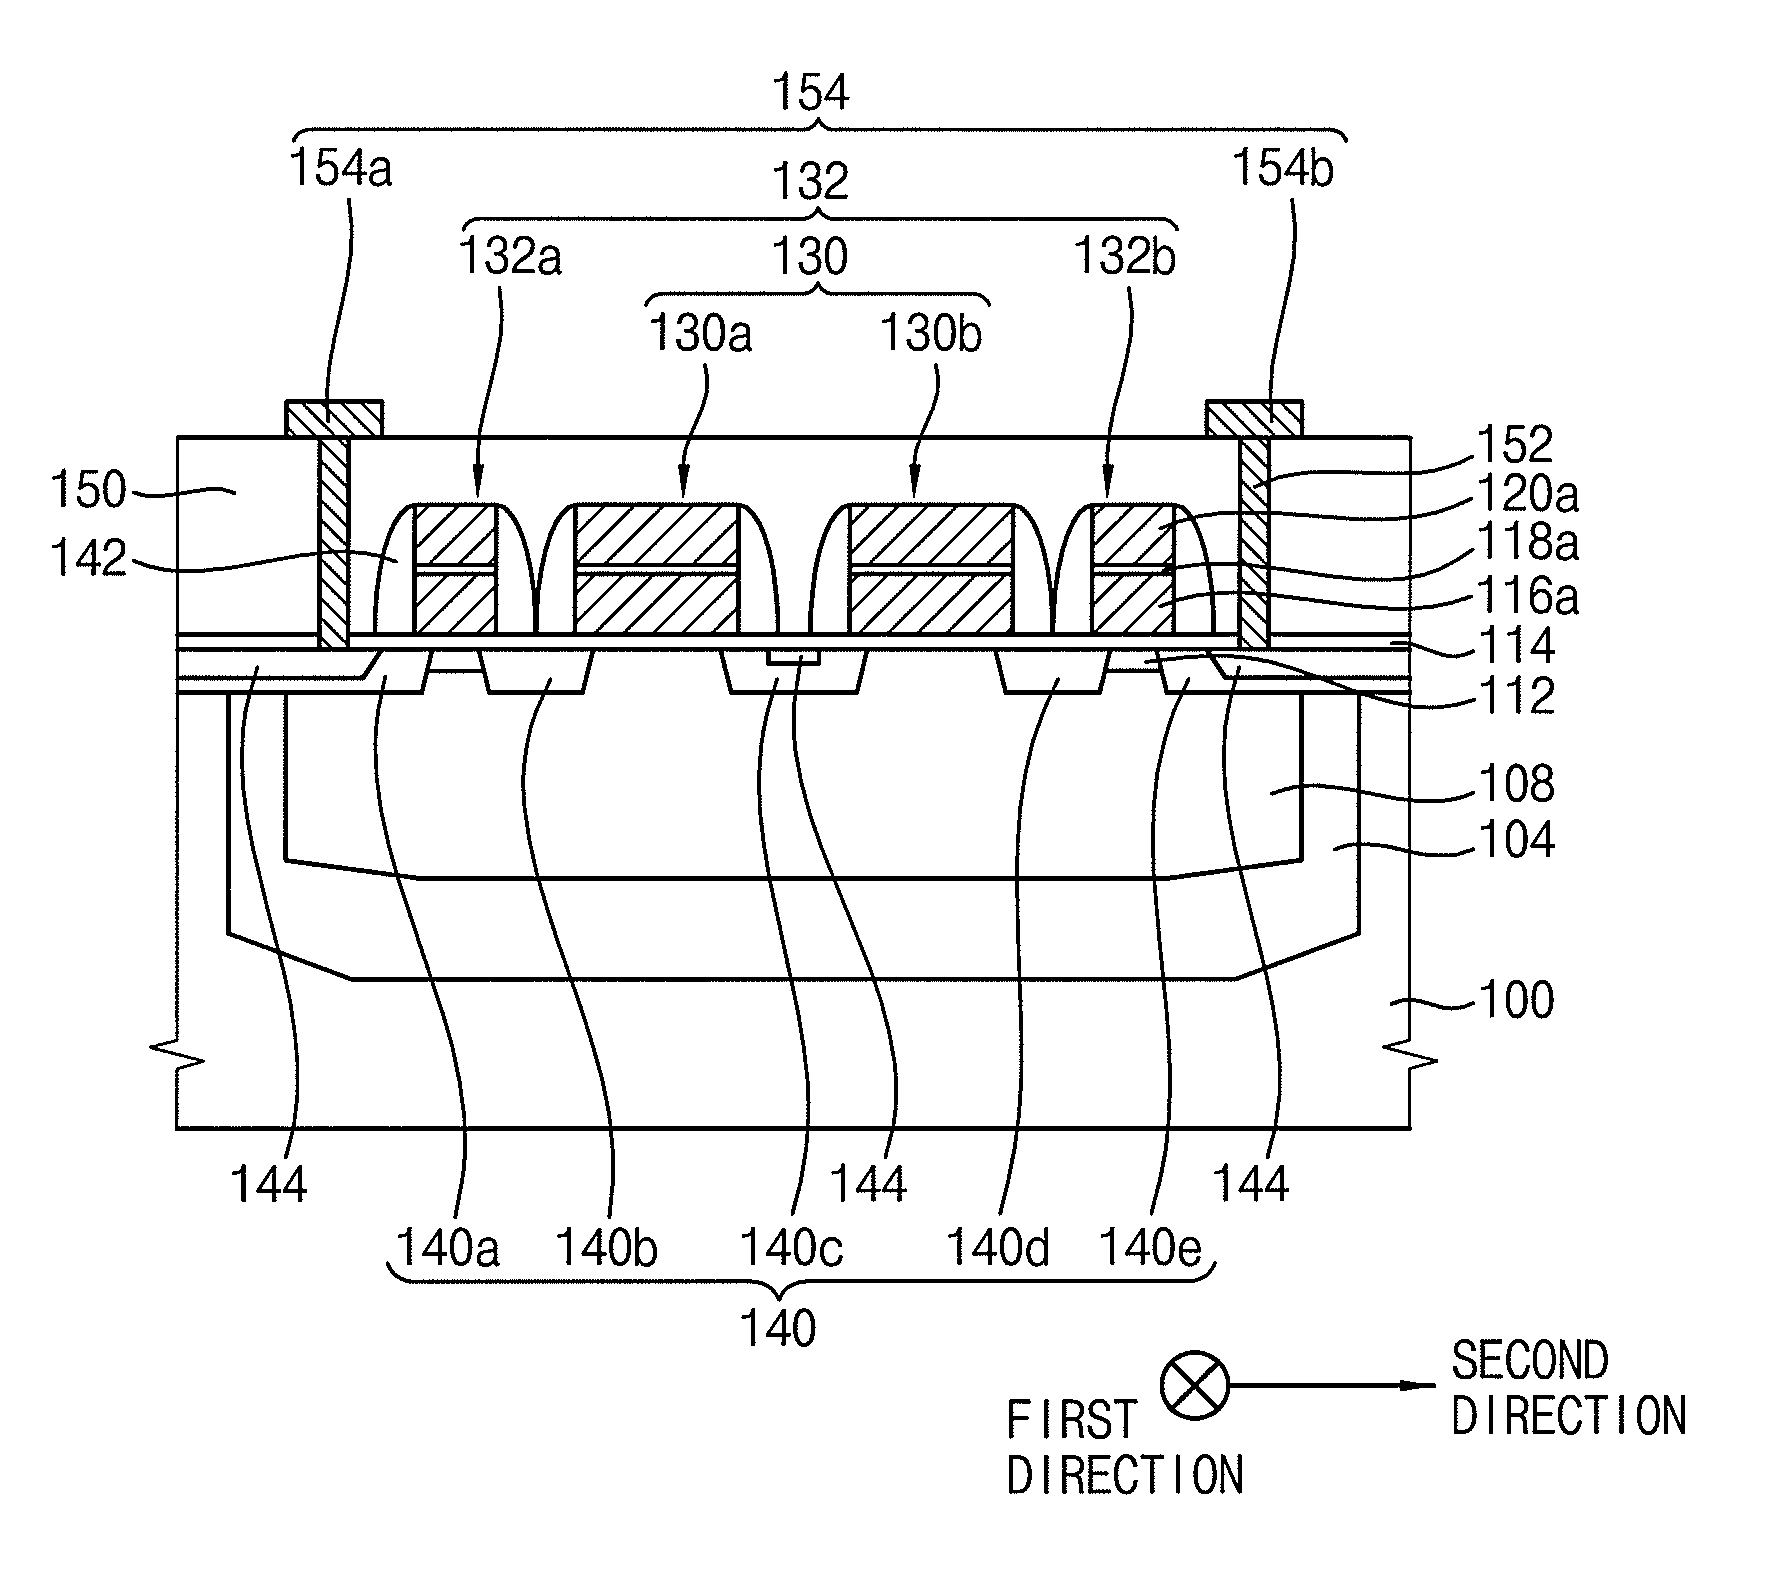 Non-volatile memory device, method of manufacturing the same and method of operating the same